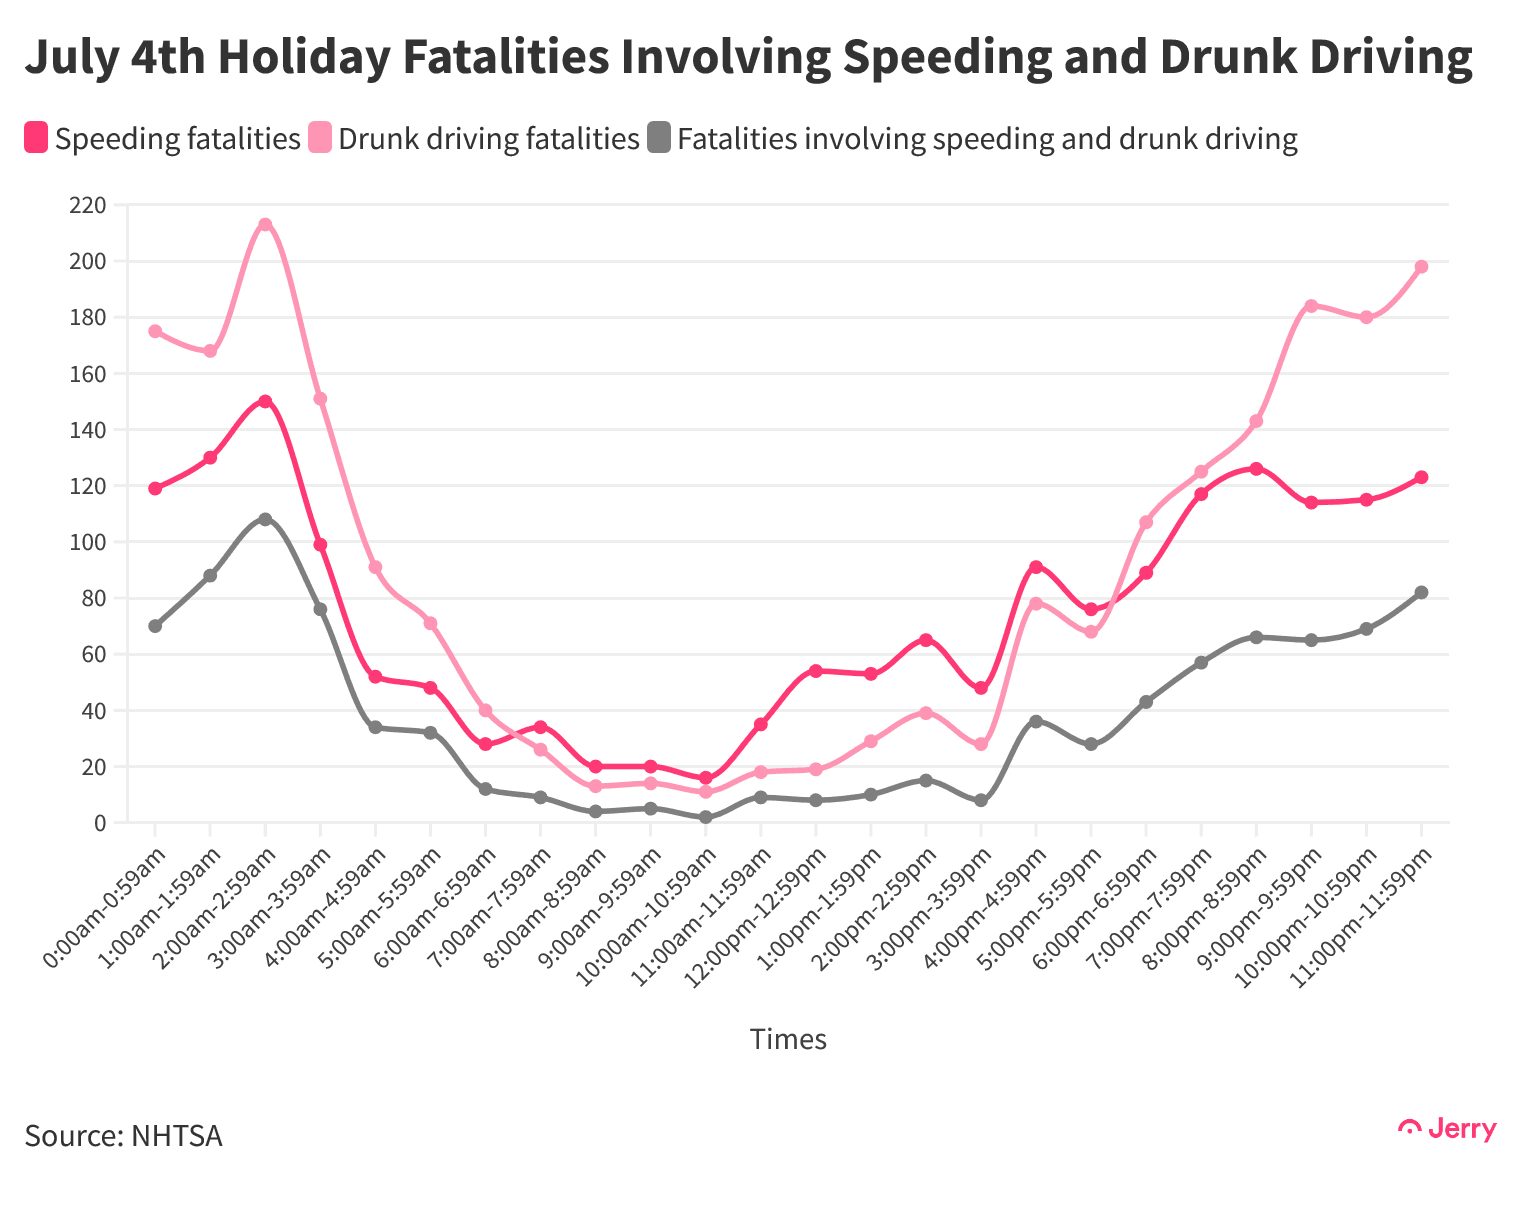 1 - July 4th Fatalities Involving Speeding and Drunk Driving@2x